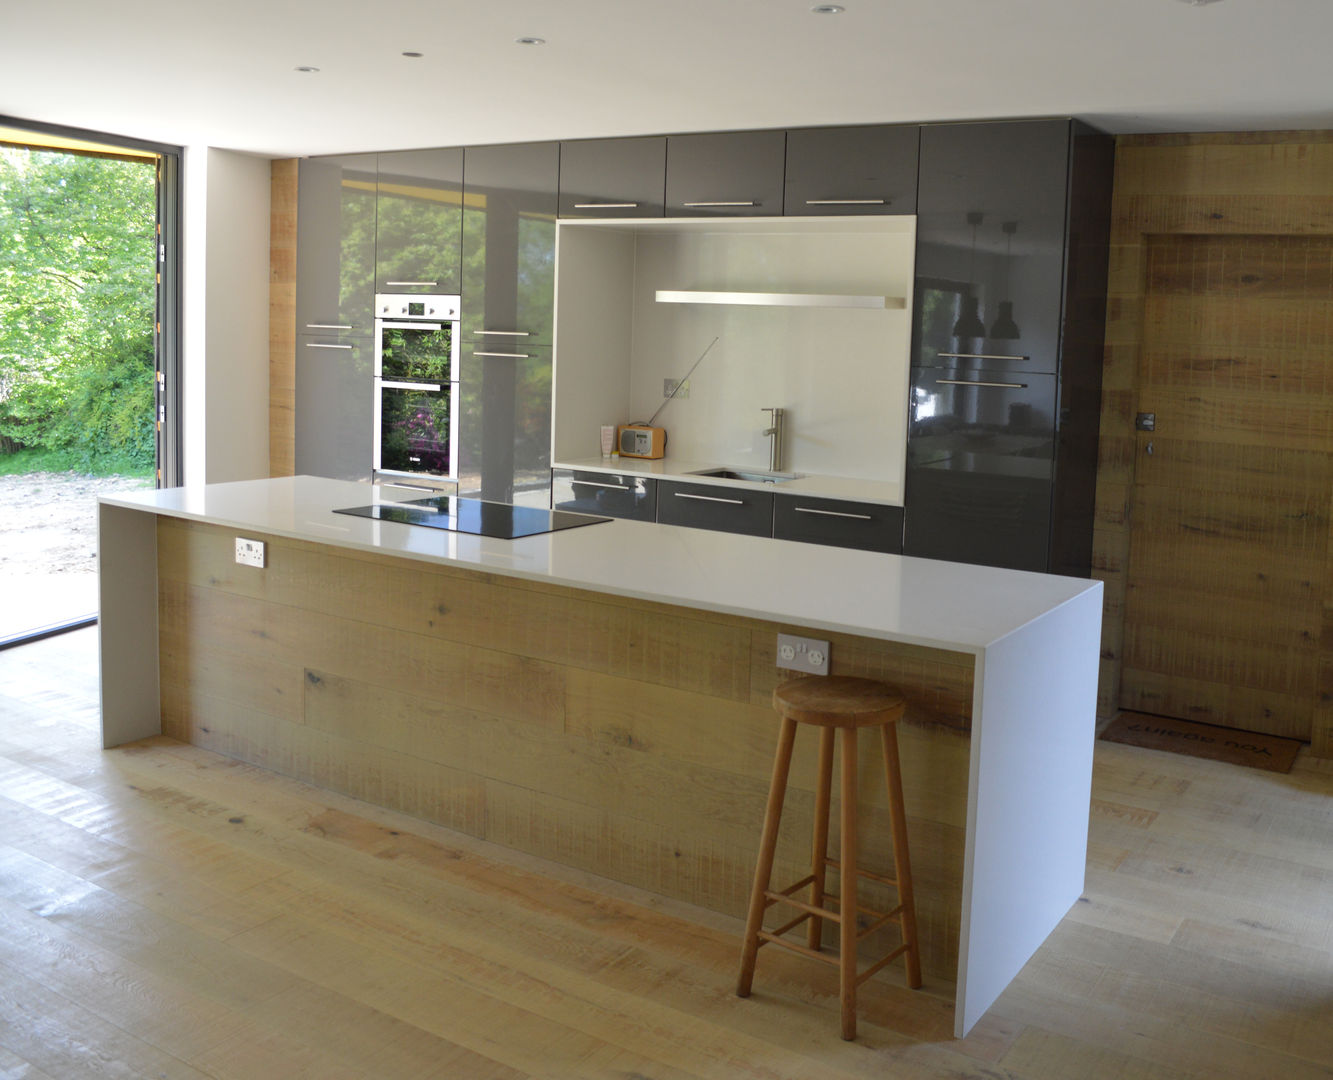 Open Plan Kitchen featuring a Bespoke Kitchen Island ArchitectureLIVE ห้องครัว kitchen island,kitchen appliances,kitchen floor,timber flooring,wood floor,concealed door,open-plan,1960s house,extension